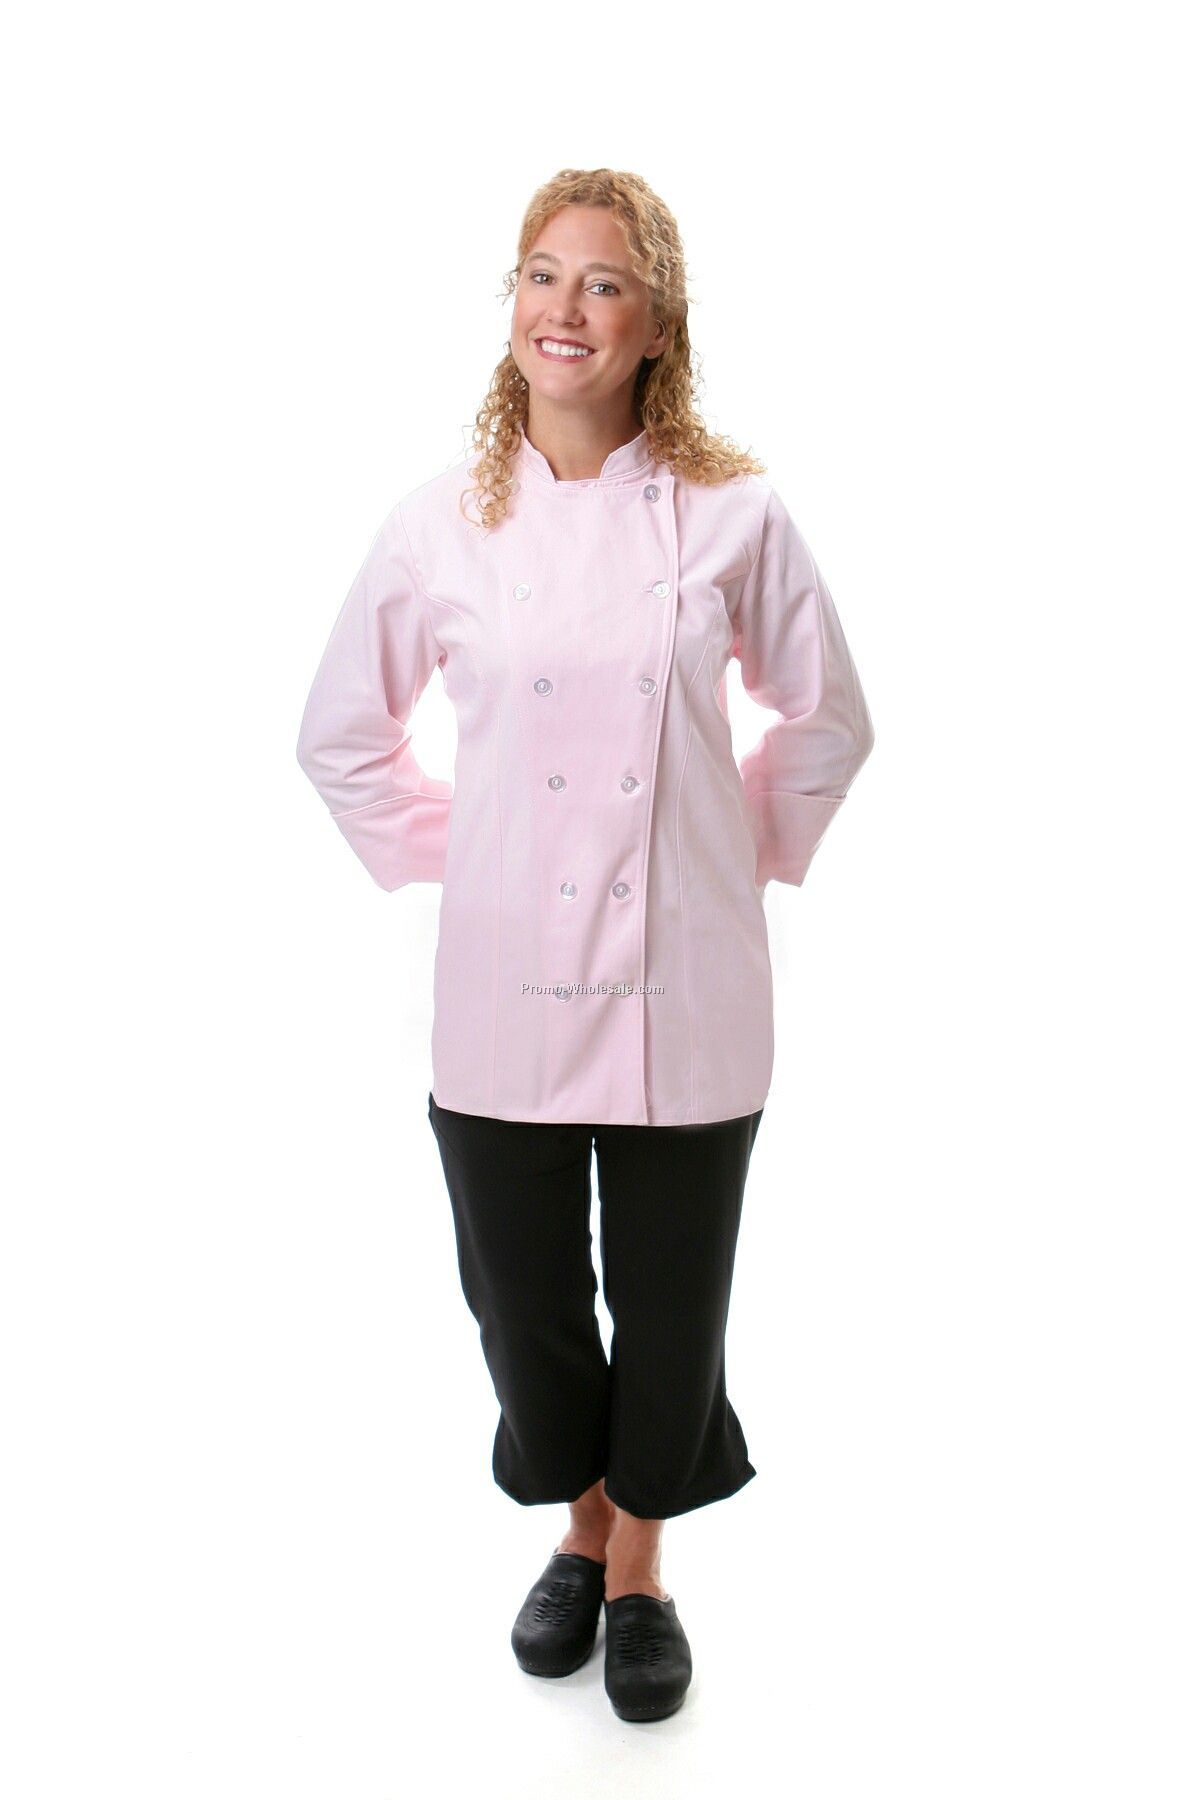 Ladies' Fitted Chef Coat - Pink (2x-large)